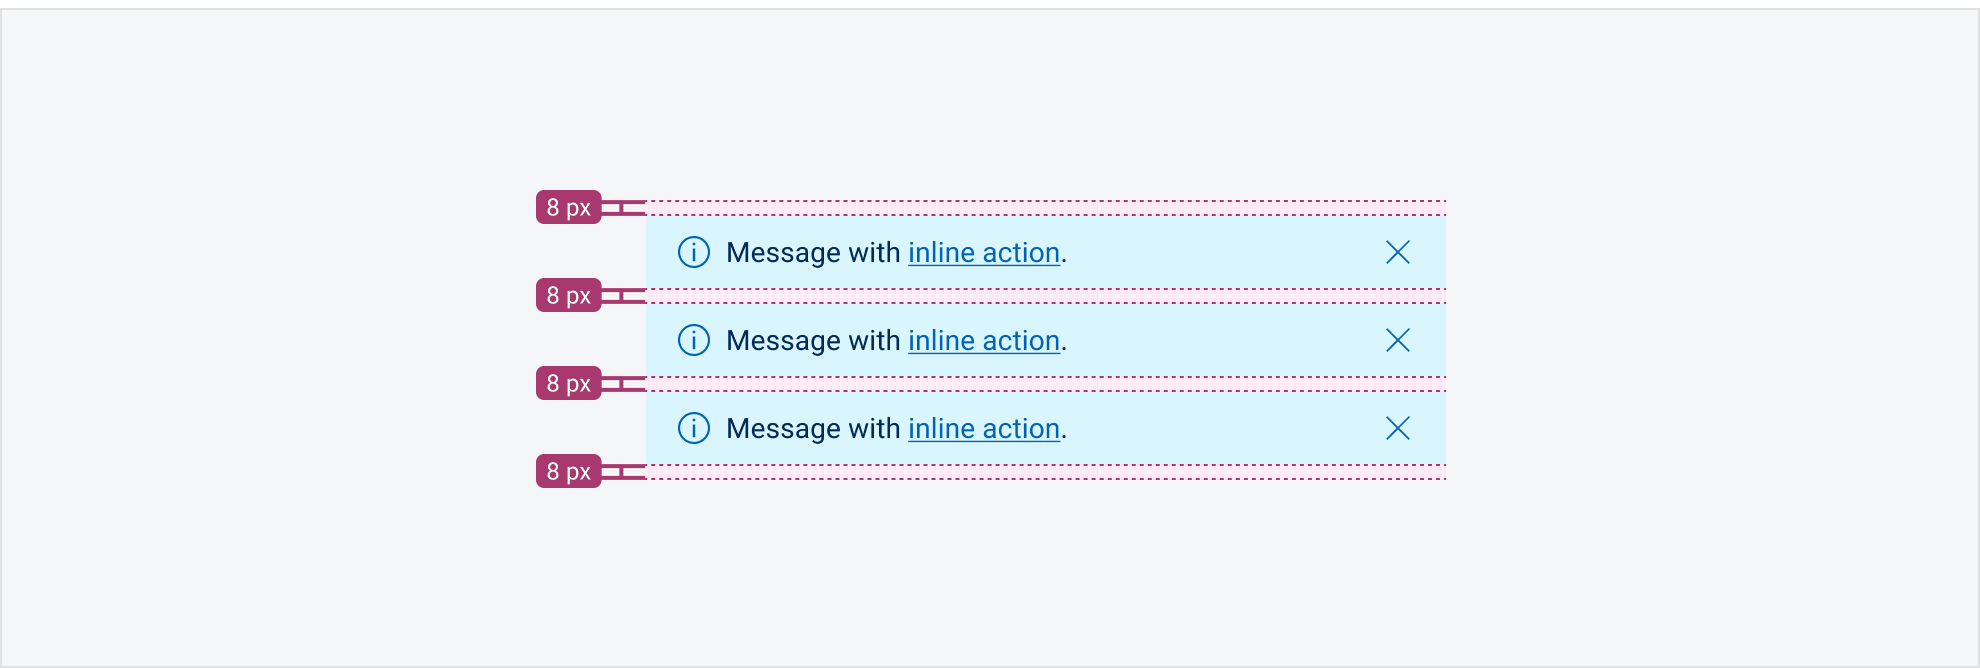 
Margins between stacked message bars.
ADD 